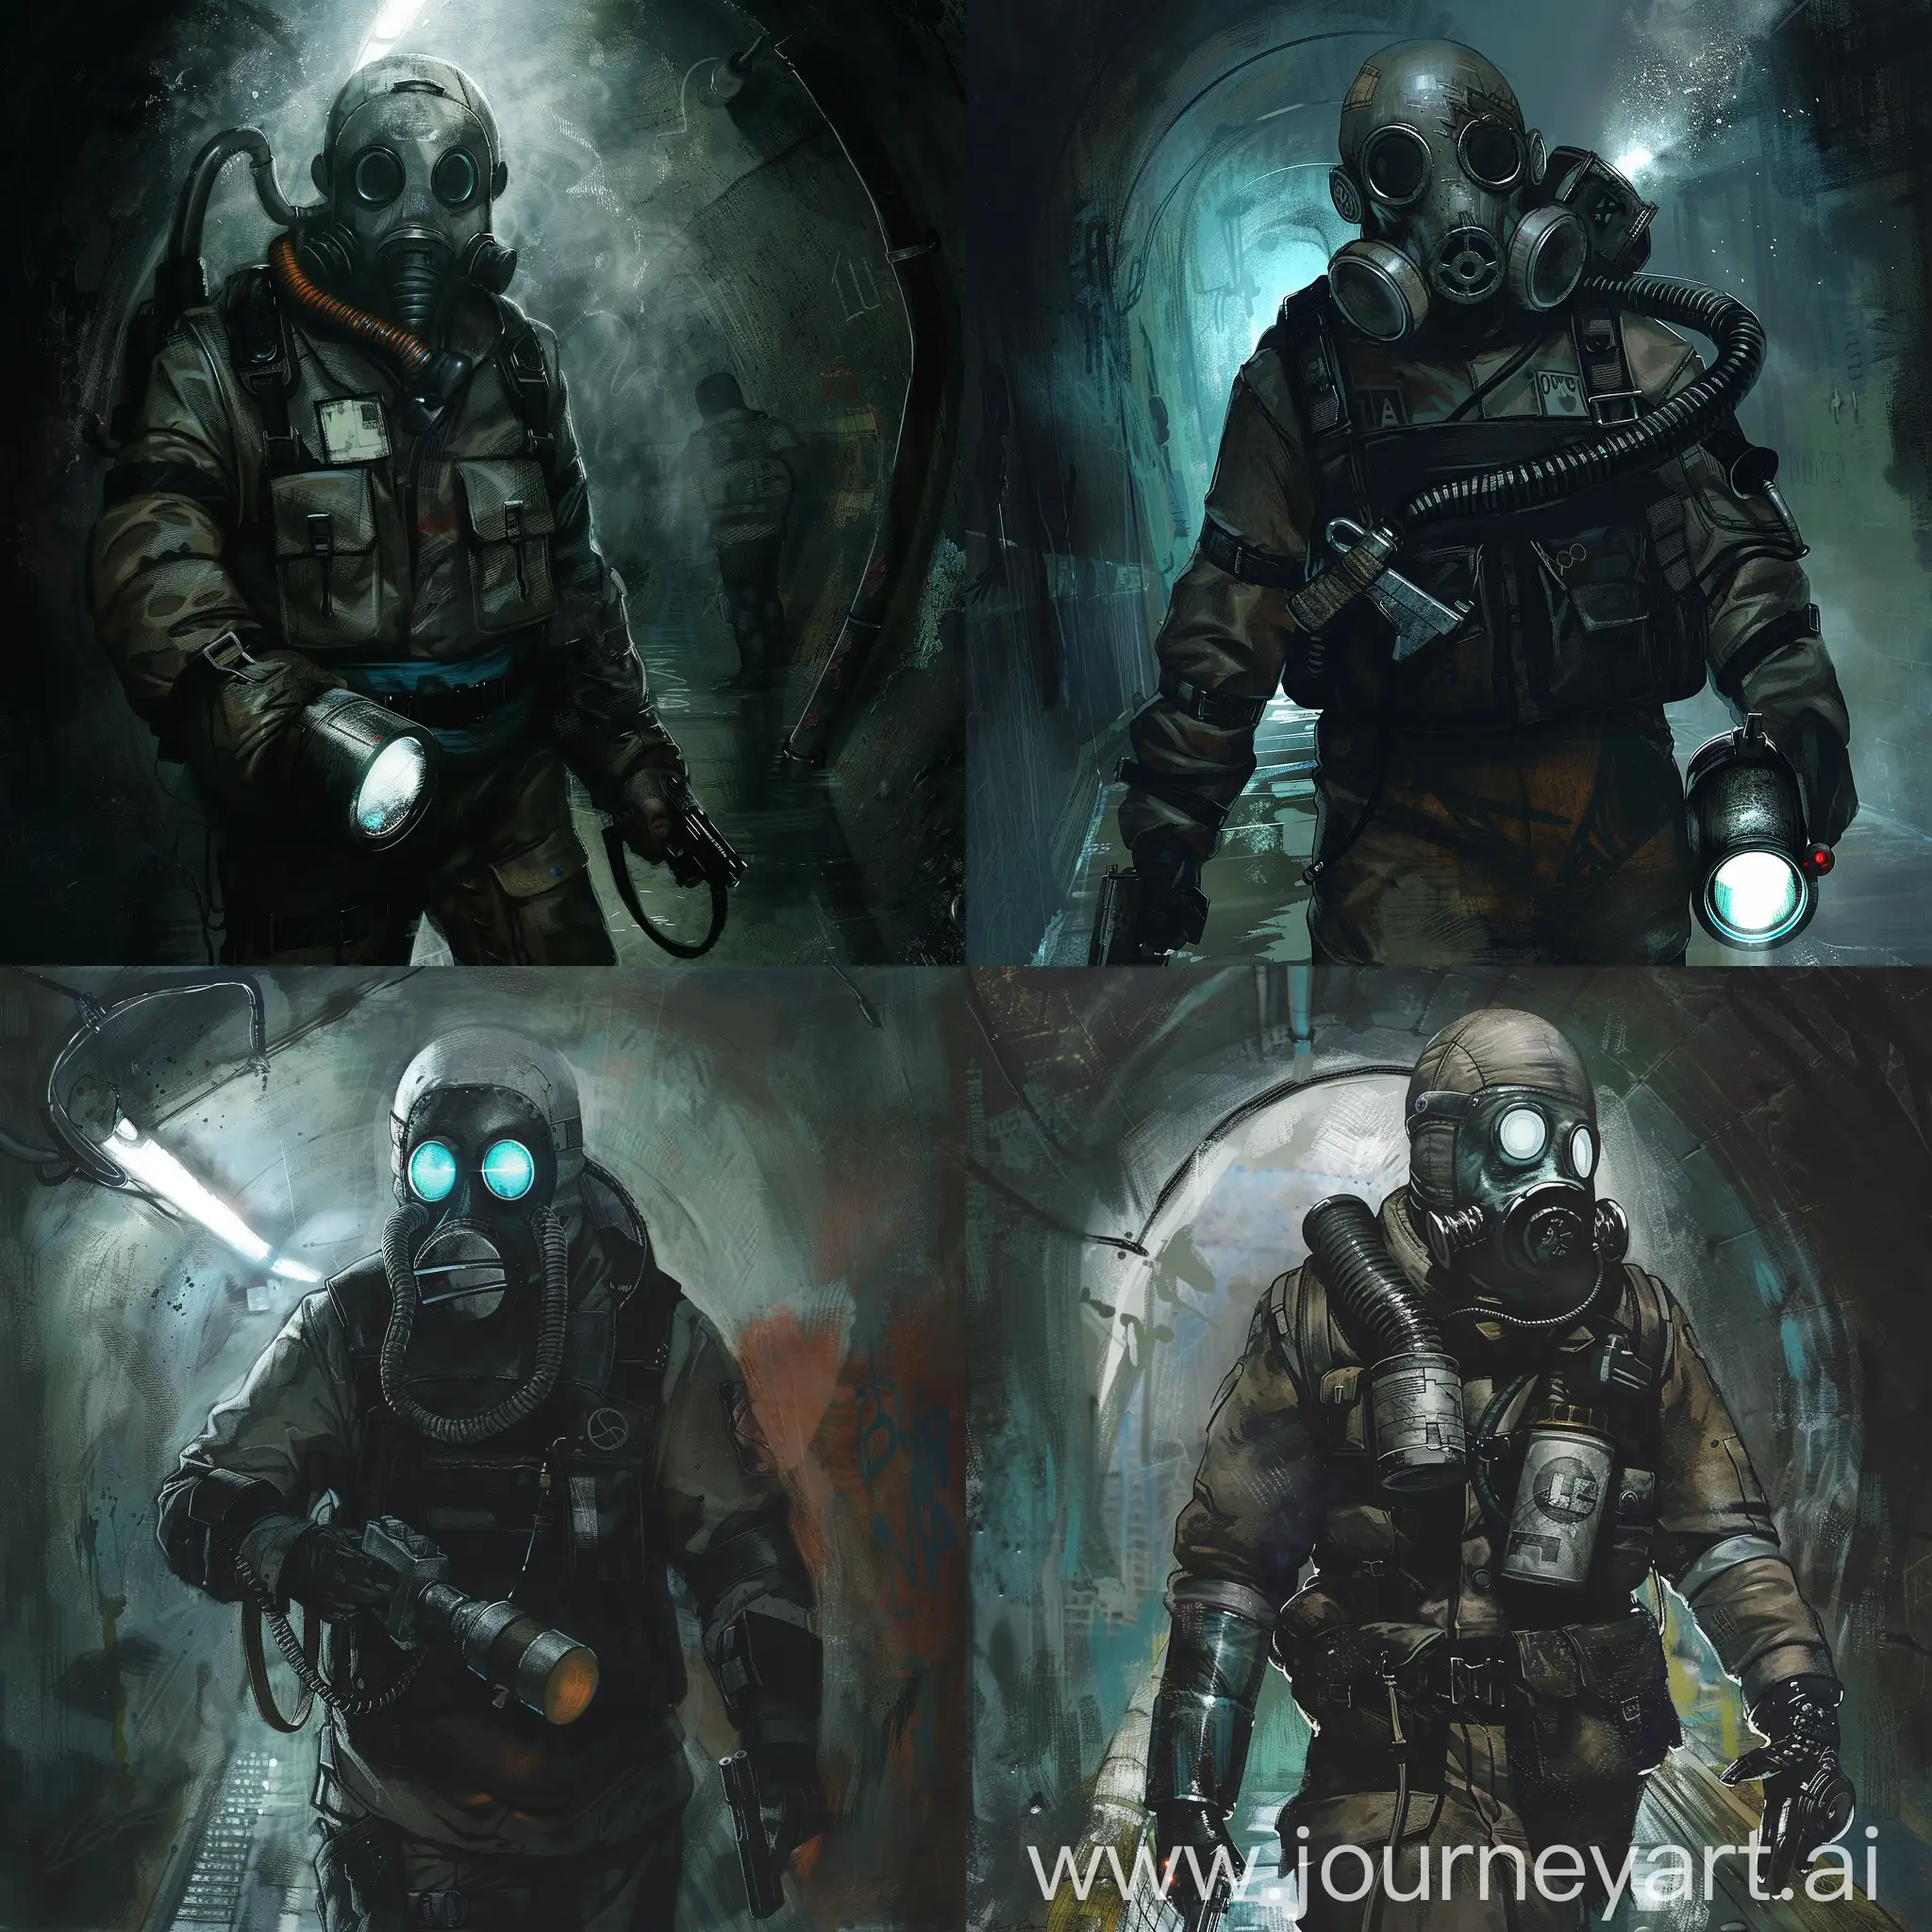 Survivor-in-Gas-Mask-with-Flashlight-and-Pistol-in-Flooded-Catacombs